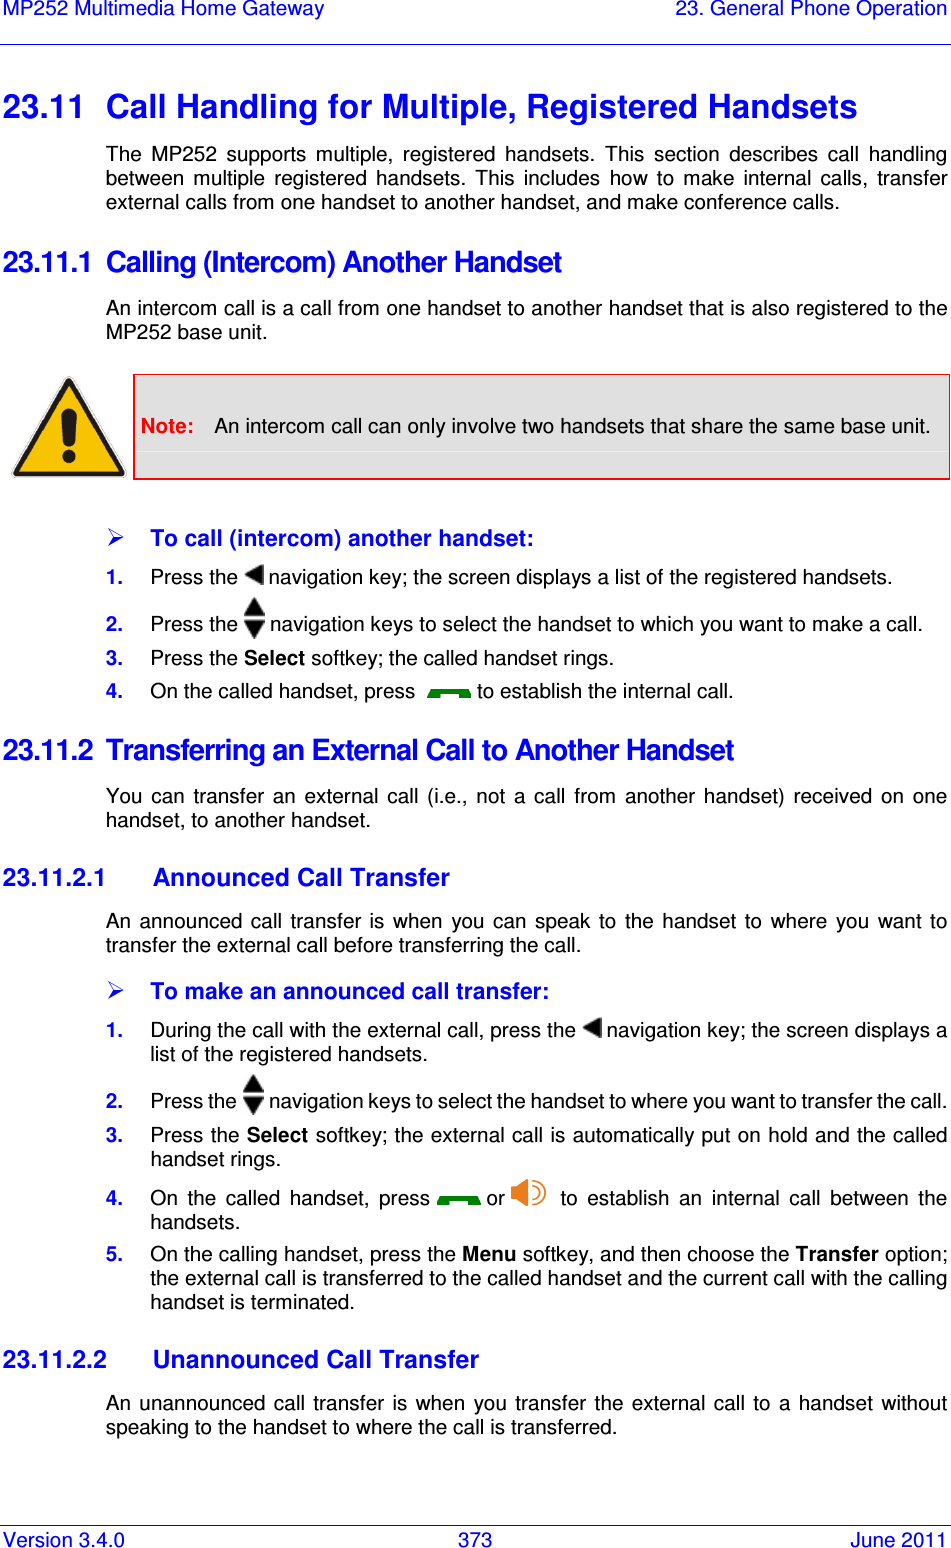 Version 3.4.0  373  June 2011 MP252 Multimedia Home Gateway  23. General Phone Operation  23.11  Call Handling for Multiple, Registered Handsets The  MP252  supports  multiple,  registered  handsets.  This  section  describes  call  handling between  multiple  registered  handsets.  This  includes  how  to  make  internal  calls,  transfer external calls from one handset to another handset, and make conference calls. 23.11.1  Calling (Intercom) Another Handset An intercom call is a call from one handset to another handset that is also registered to the MP252 base unit.   Note:  An intercom call can only involve two handsets that share the same base unit.   To call (intercom) another handset: 1.  Press the   navigation key; the screen displays a list of the registered handsets. 2.  Press the   navigation keys to select the handset to which you want to make a call. 3.  Press the Select softkey; the called handset rings. 4.  On the called handset, press    to establish the internal call. 23.11.2  Transferring an External Call to Another Handset You  can  transfer  an  external  call  (i.e.,  not  a  call  from  another  handset)  received  on  one handset, to another handset. 23.11.2.1  Announced Call Transfer An  announced  call transfer  is  when  you  can  speak to the  handset  to  where  you  want to transfer the external call before transferring the call.  To make an announced call transfer: 1.  During the call with the external call, press the   navigation key; the screen displays a list of the registered handsets. 2.  Press the   navigation keys to select the handset to where you want to transfer the call. 3.  Press the Select softkey; the external call is automatically put on hold and the called handset rings. 4.  On  the  called  handset,  press   or     to  establish  an  internal  call  between  the handsets. 5.  On the calling handset, press the Menu softkey, and then choose the Transfer option; the external call is transferred to the called handset and the current call with the calling handset is terminated. 23.11.2.2  Unannounced Call Transfer An unannounced  call  transfer is  when  you  transfer  the  external  call  to  a  handset  without speaking to the handset to where the call is transferred. 